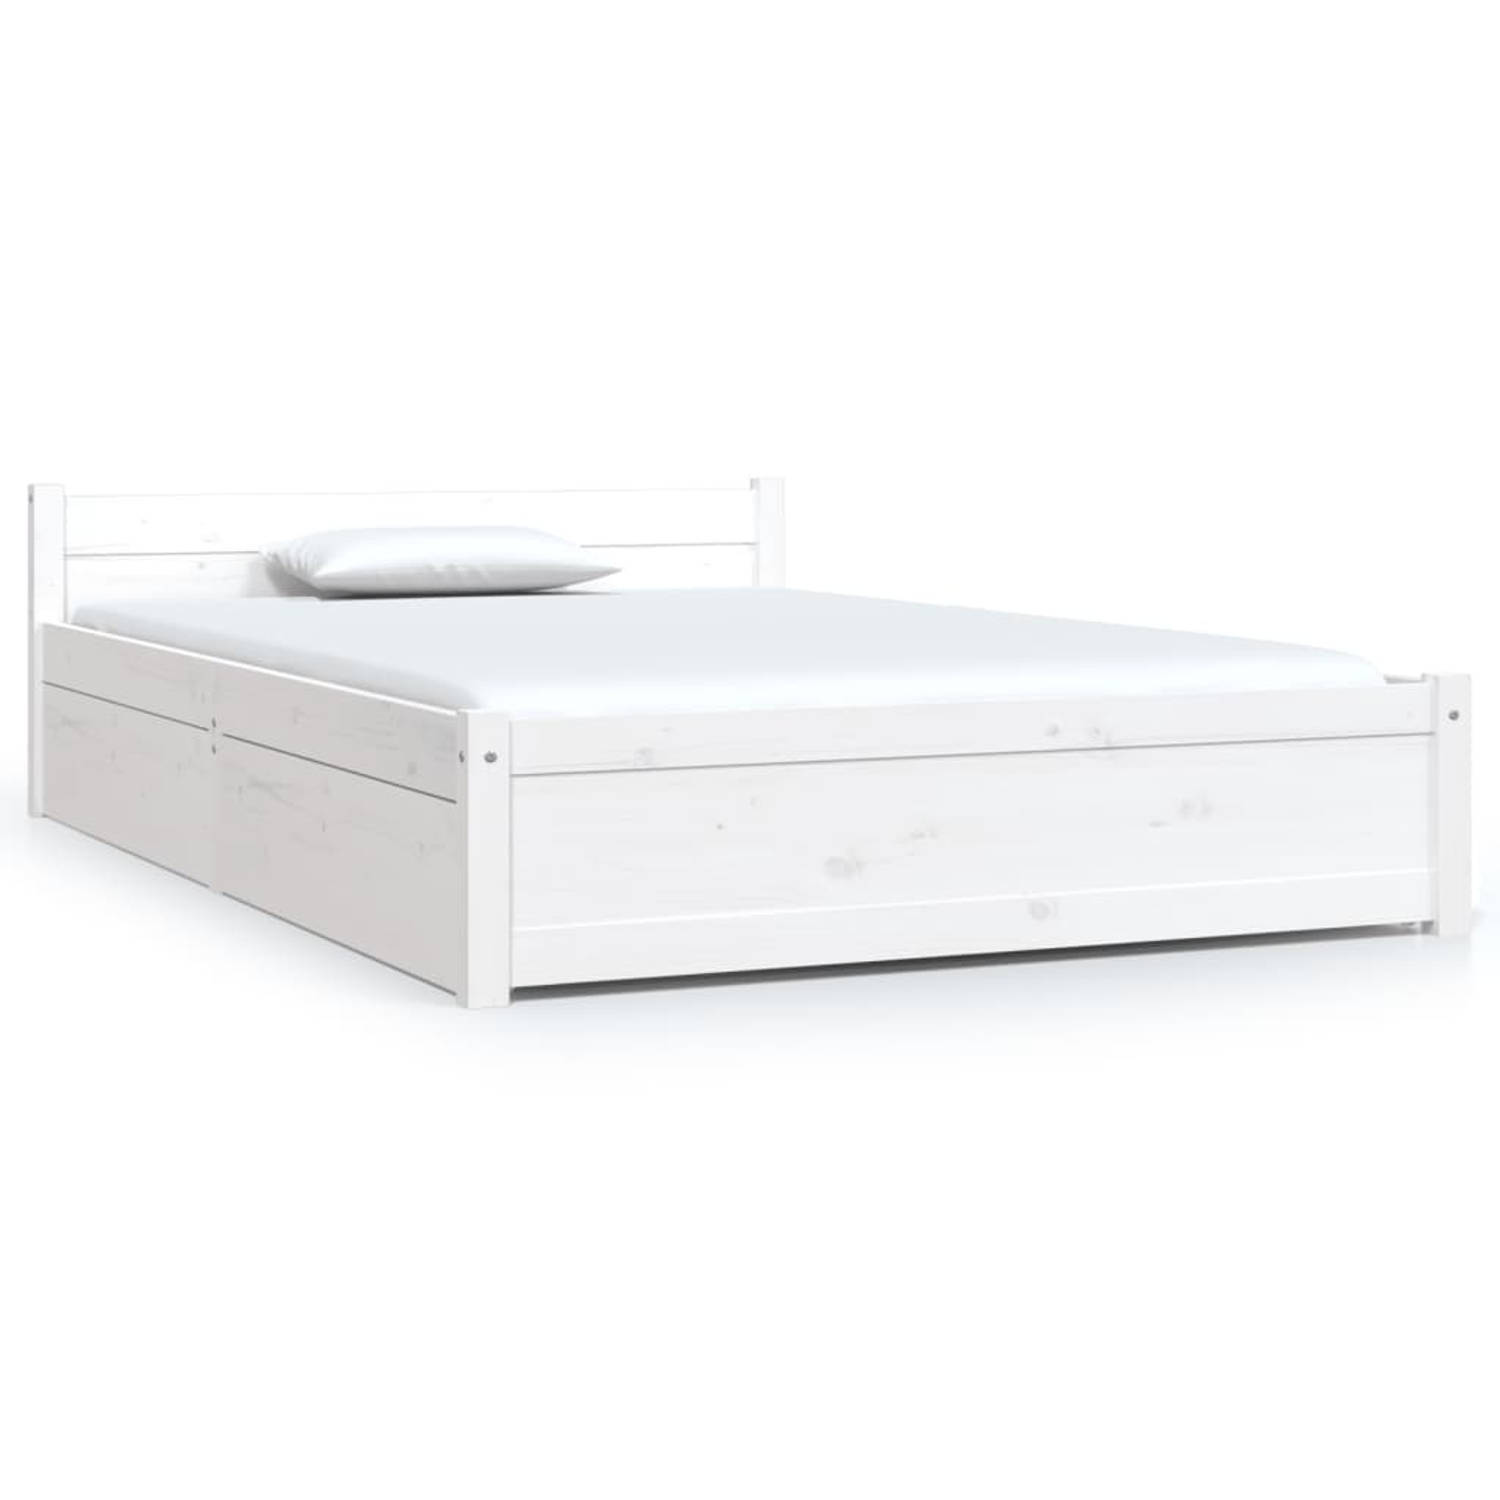 The Living Store Bed Grenenhout - Opbergbed 120x190cm - Wit